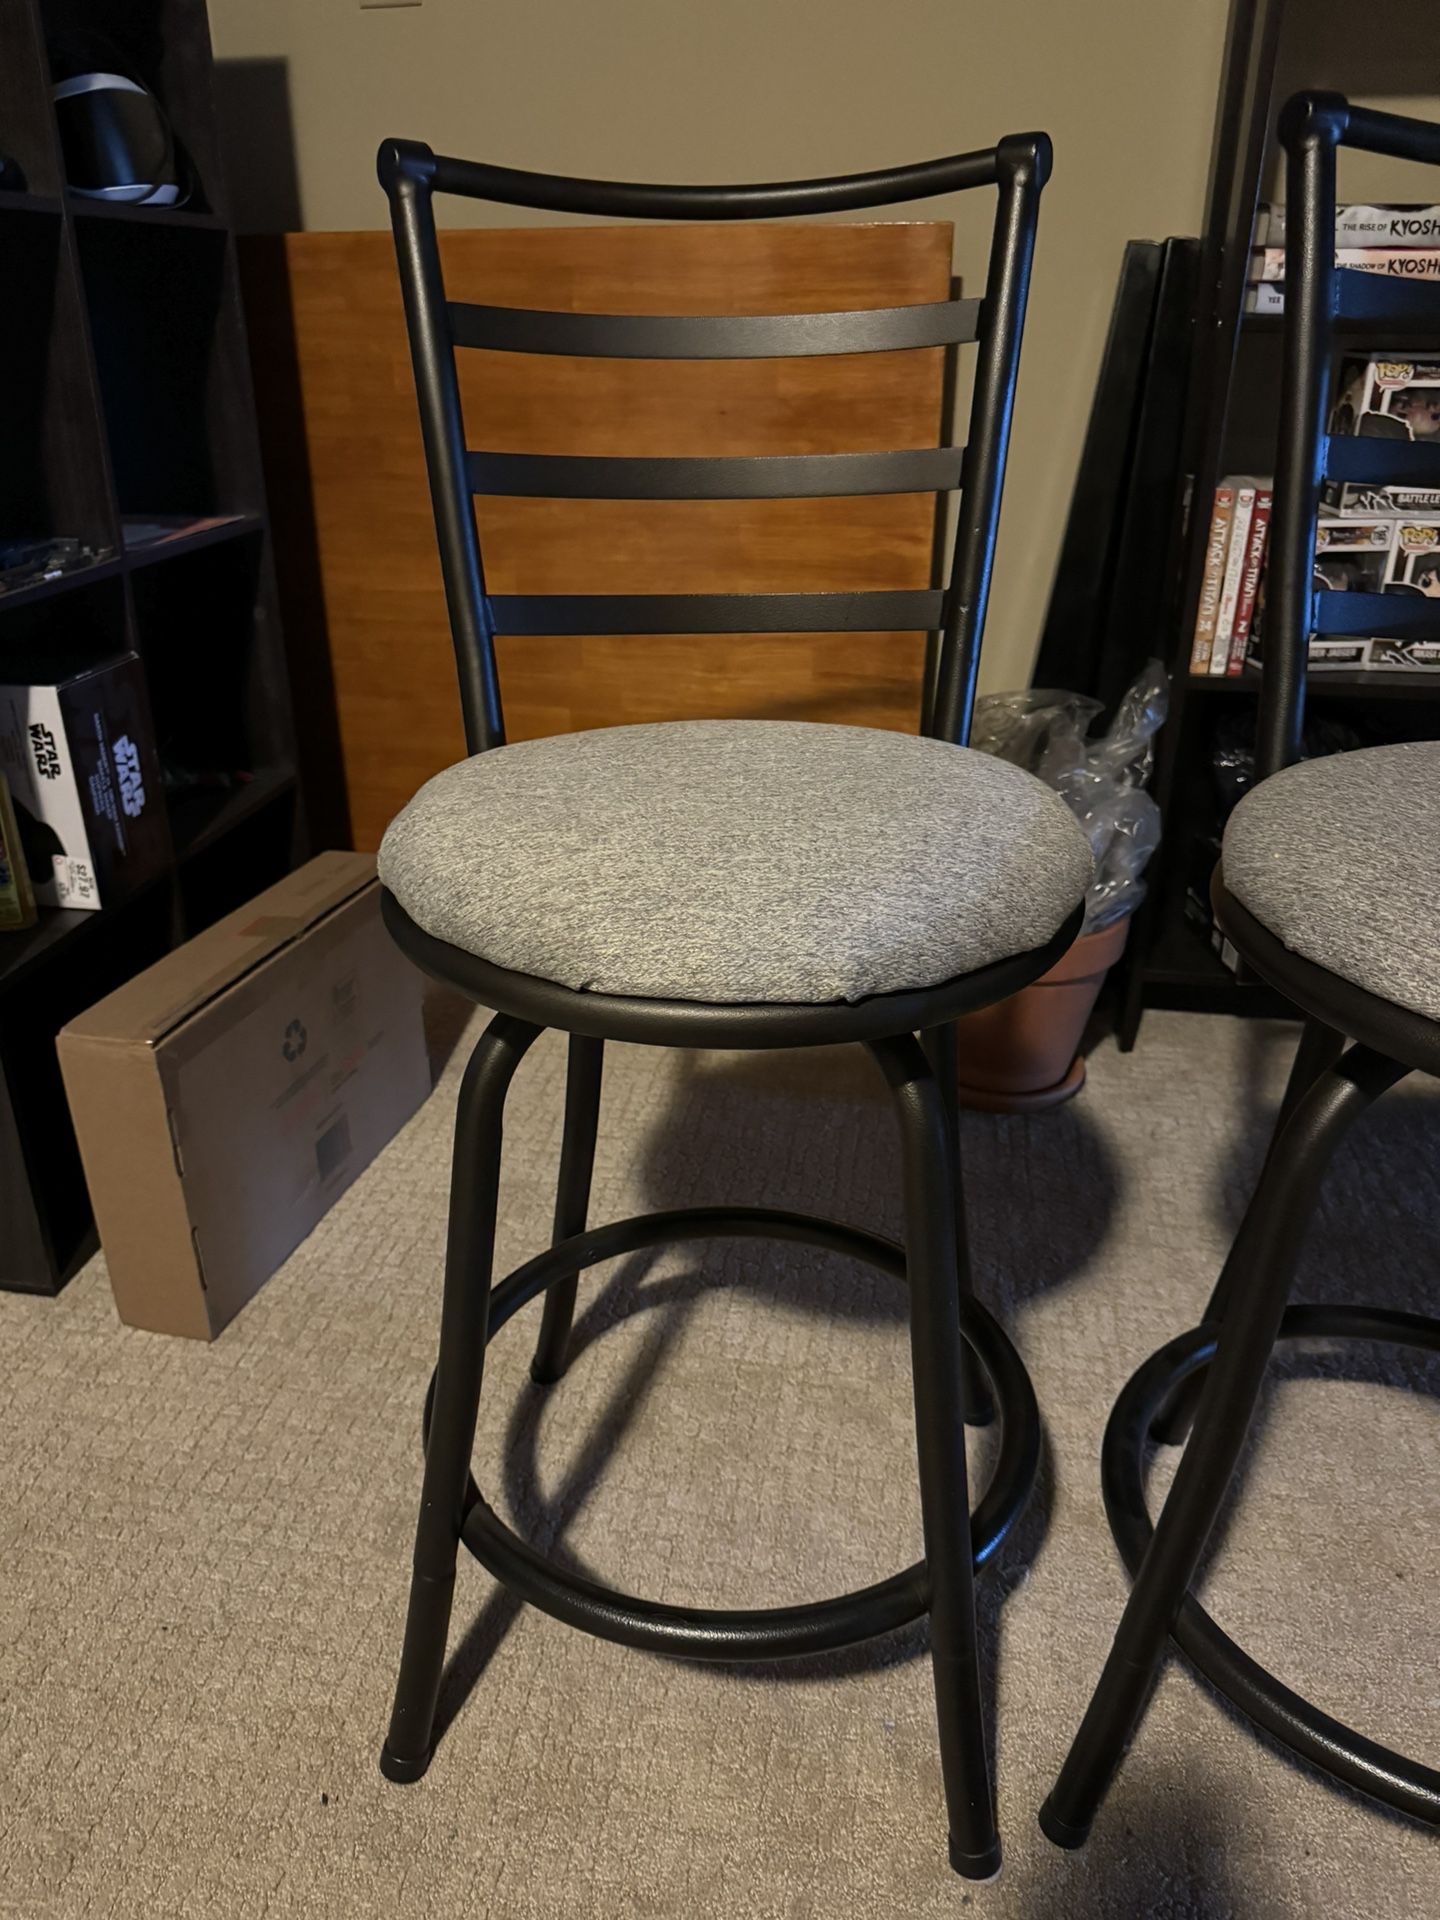 LAST CHANCE MUST GO 1/31 - Pub Style Table & 4 Stools